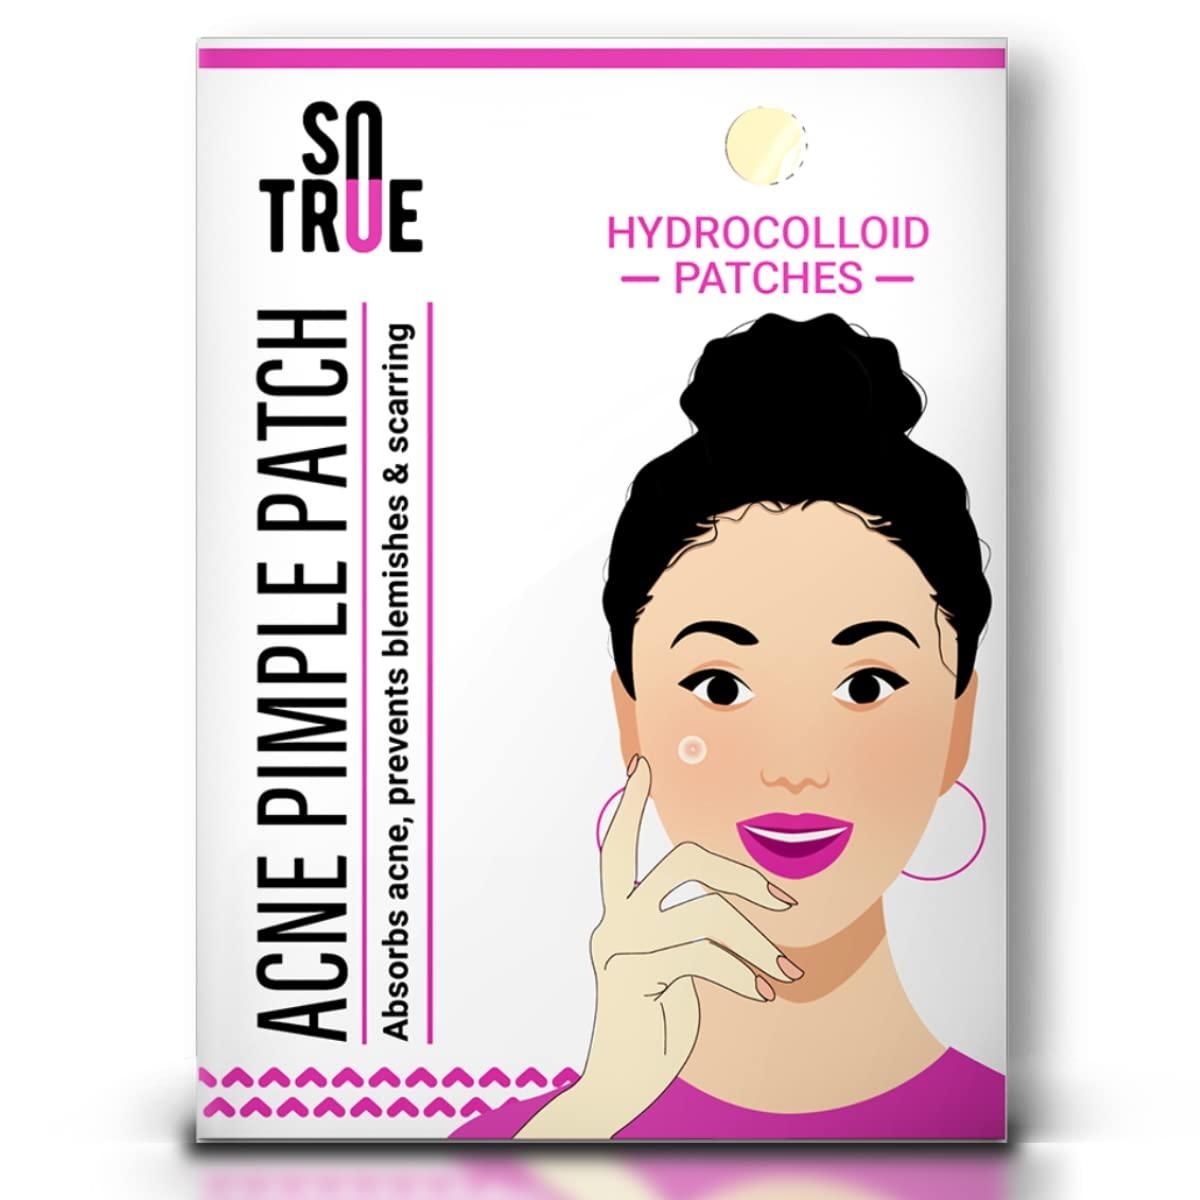 SoTrue Acne Pimple Patches For Face Hydrocolloid Waterproof Patches (36 Patches)